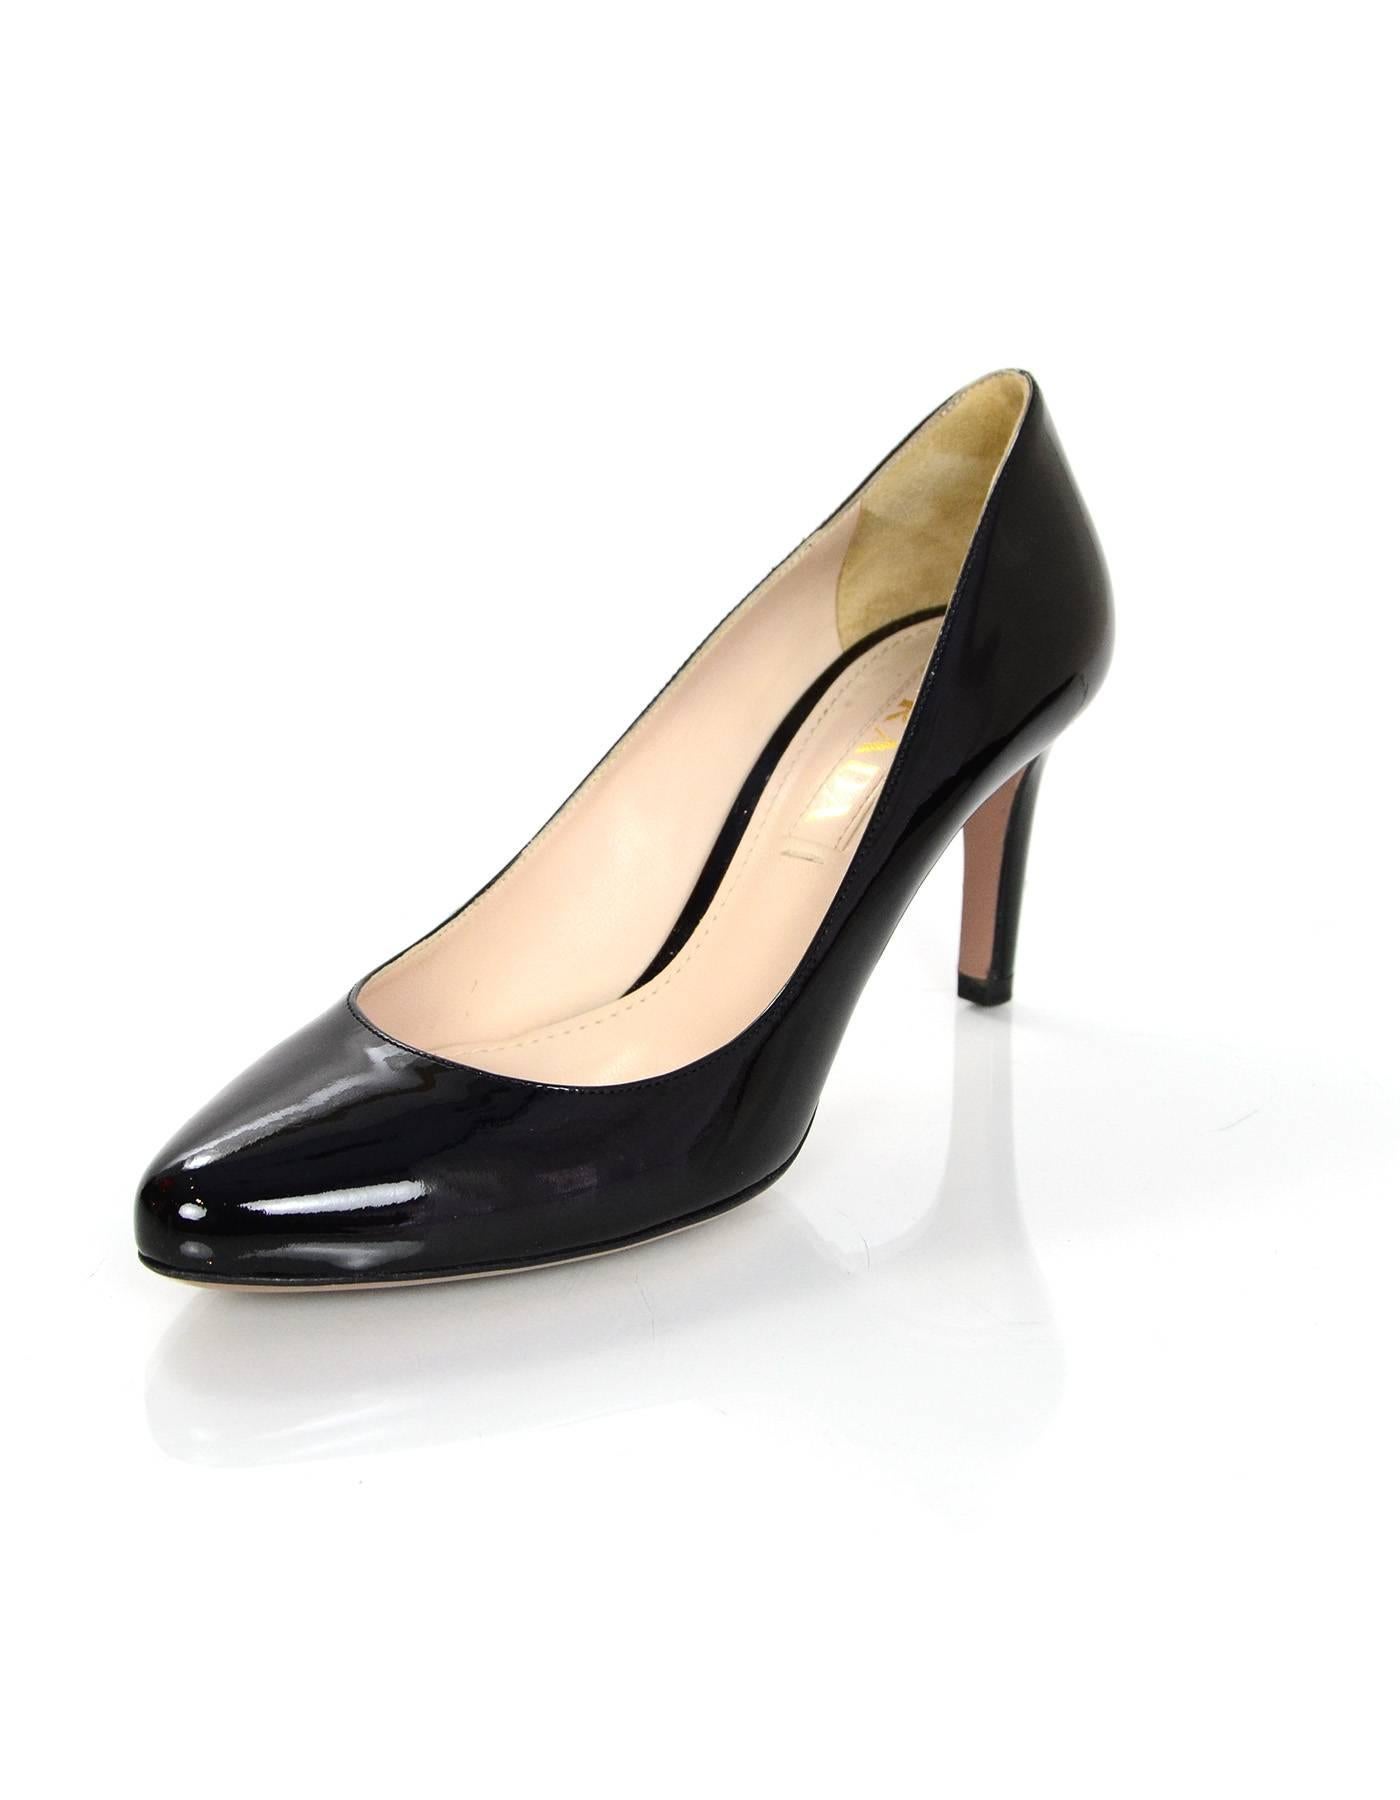 Prada Black Patent Almond Toe Pumps Sz 35.5

Made in: Italy
Color: Black
Materials: Patent leather
Closure/opening: Slide on
Sole Stamp: Prada 35.5 Made in Italy
Overall Condition: Excellent pre-owned condition with the exception of minor wear at